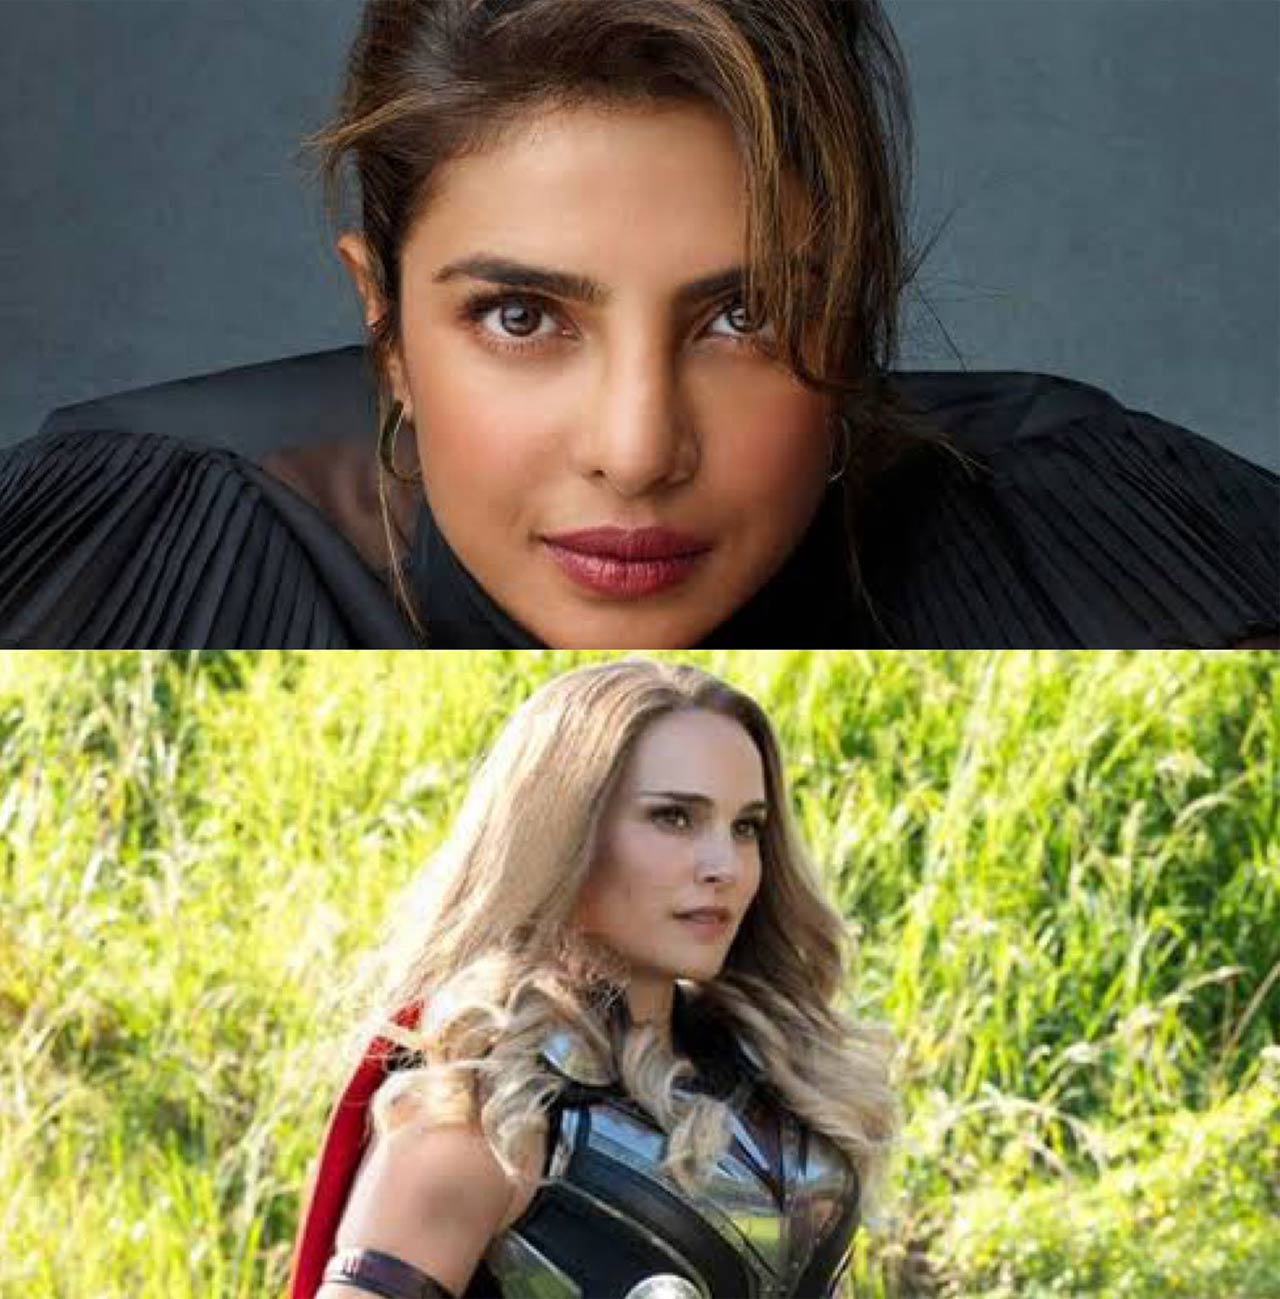 Natalie Portman's Mighty Thor will be seen as the powerful and muscular female version of Thor in the upcoming Marvel extravaganza, Thor: Love and Thunder. Her feminine and all-powerful look is testament to the fact that women can don action roles and be just as good. The last time someone broke that mold, it was none other than Priyanka Chopra who shonw on the American show Quantico with brain and brawn. Physically too, we can totally visualise the actor bulking up to look exactly like Portman's Mighty Thor